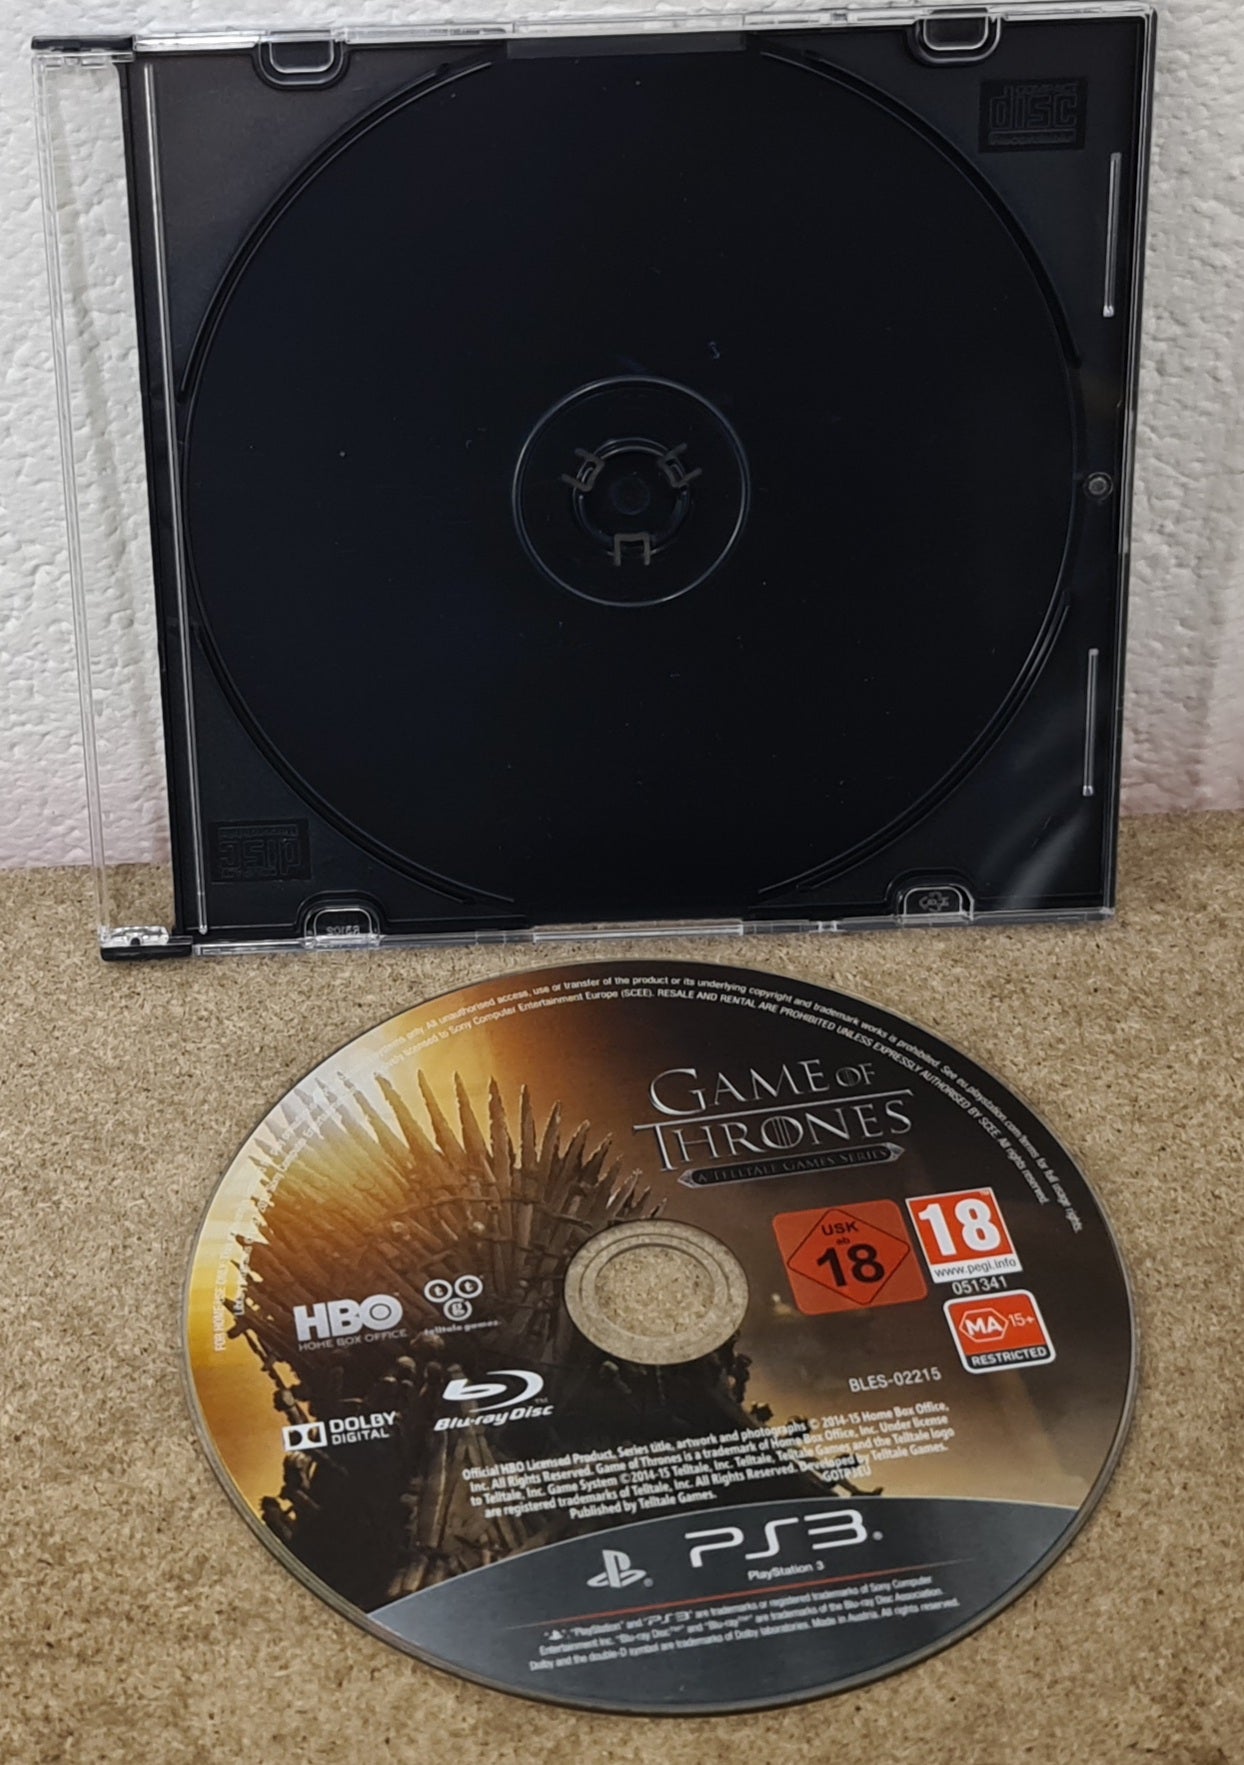 Game of Thrones a Telltale Series Sony Playstation 3 (PS3) Game Disc Only